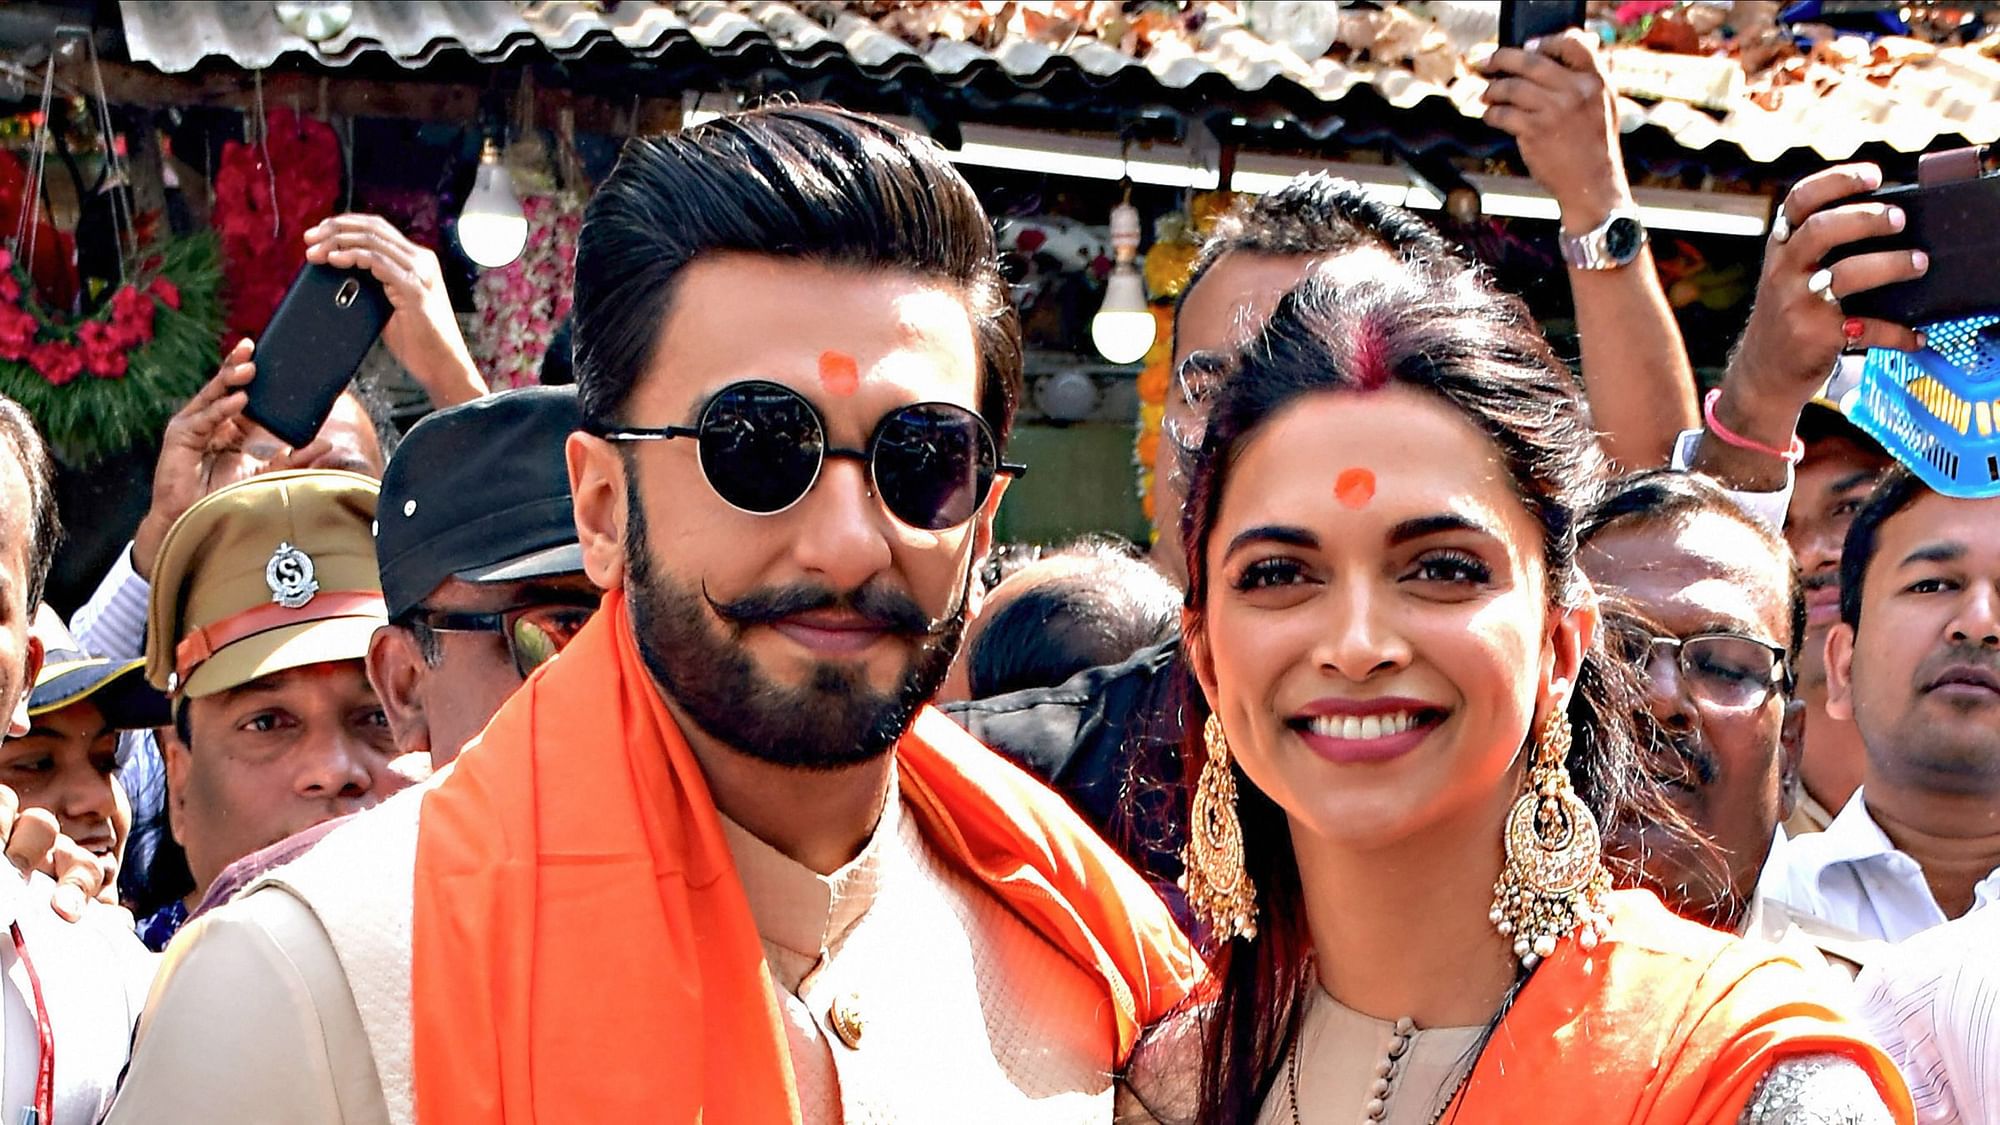 Newly-wed Bollywood actors Deepika Padukone and Ranveer Singh pose for photos on their visit to Siddhivinayak Temple, in Mumbai, Friday, Nov. 30, 2018.